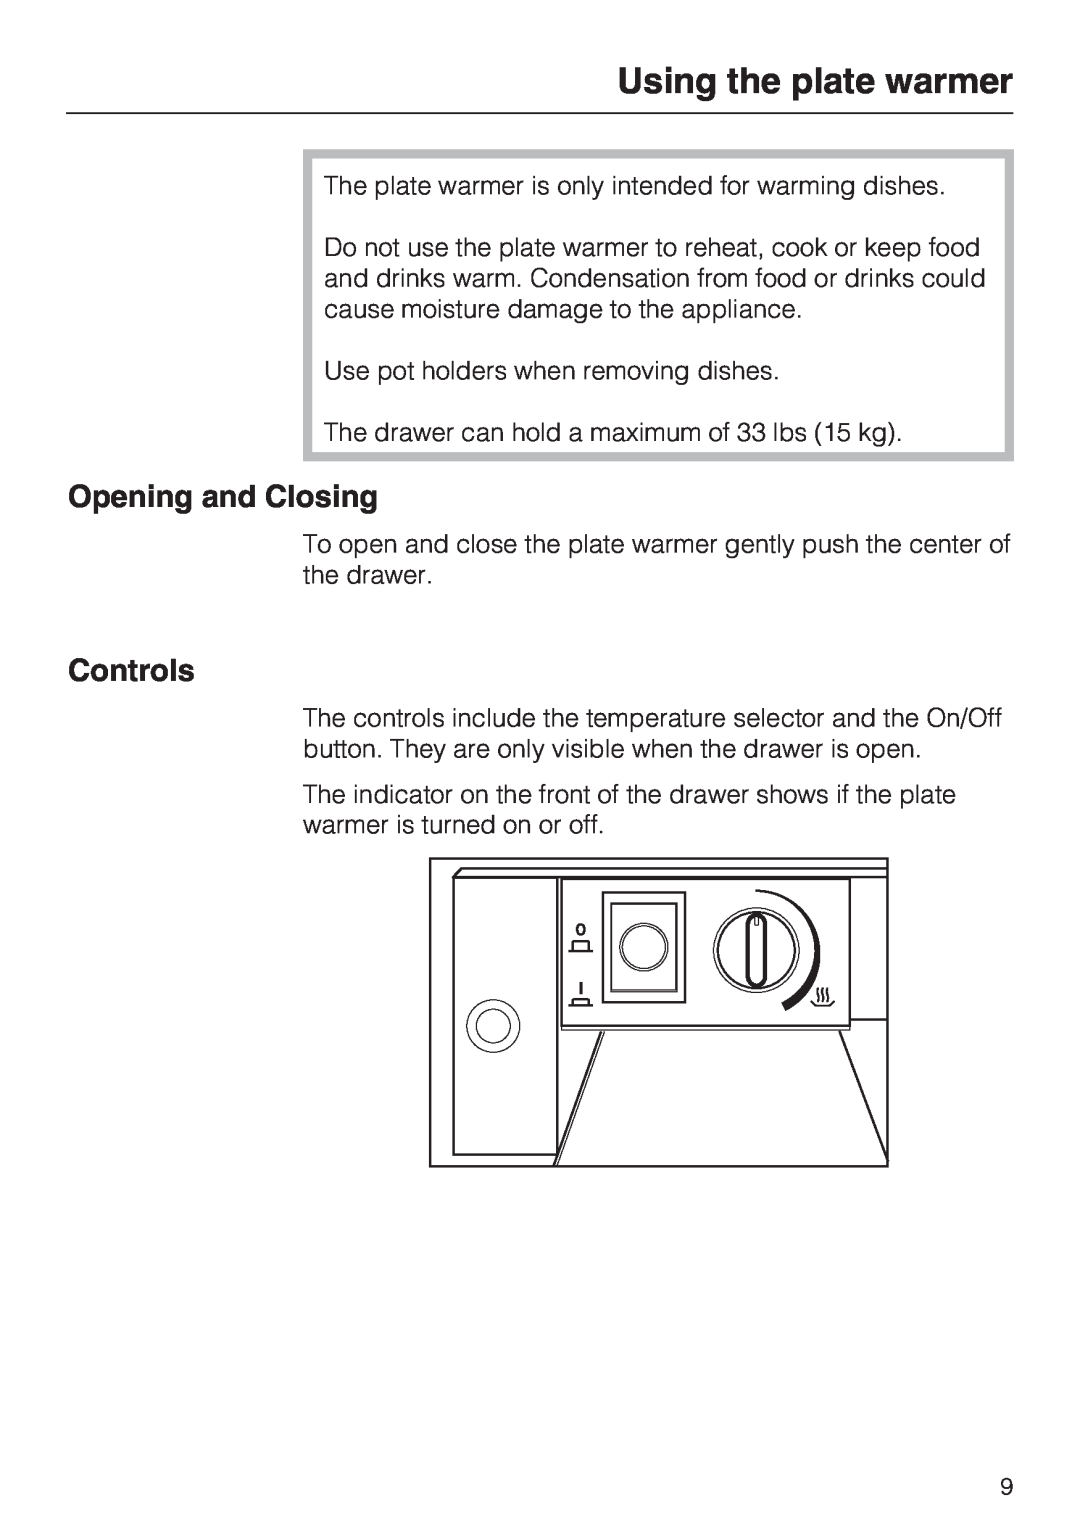 Miele EGW2062 installation instructions Using the plate warmer, Opening and Closing, Controls 